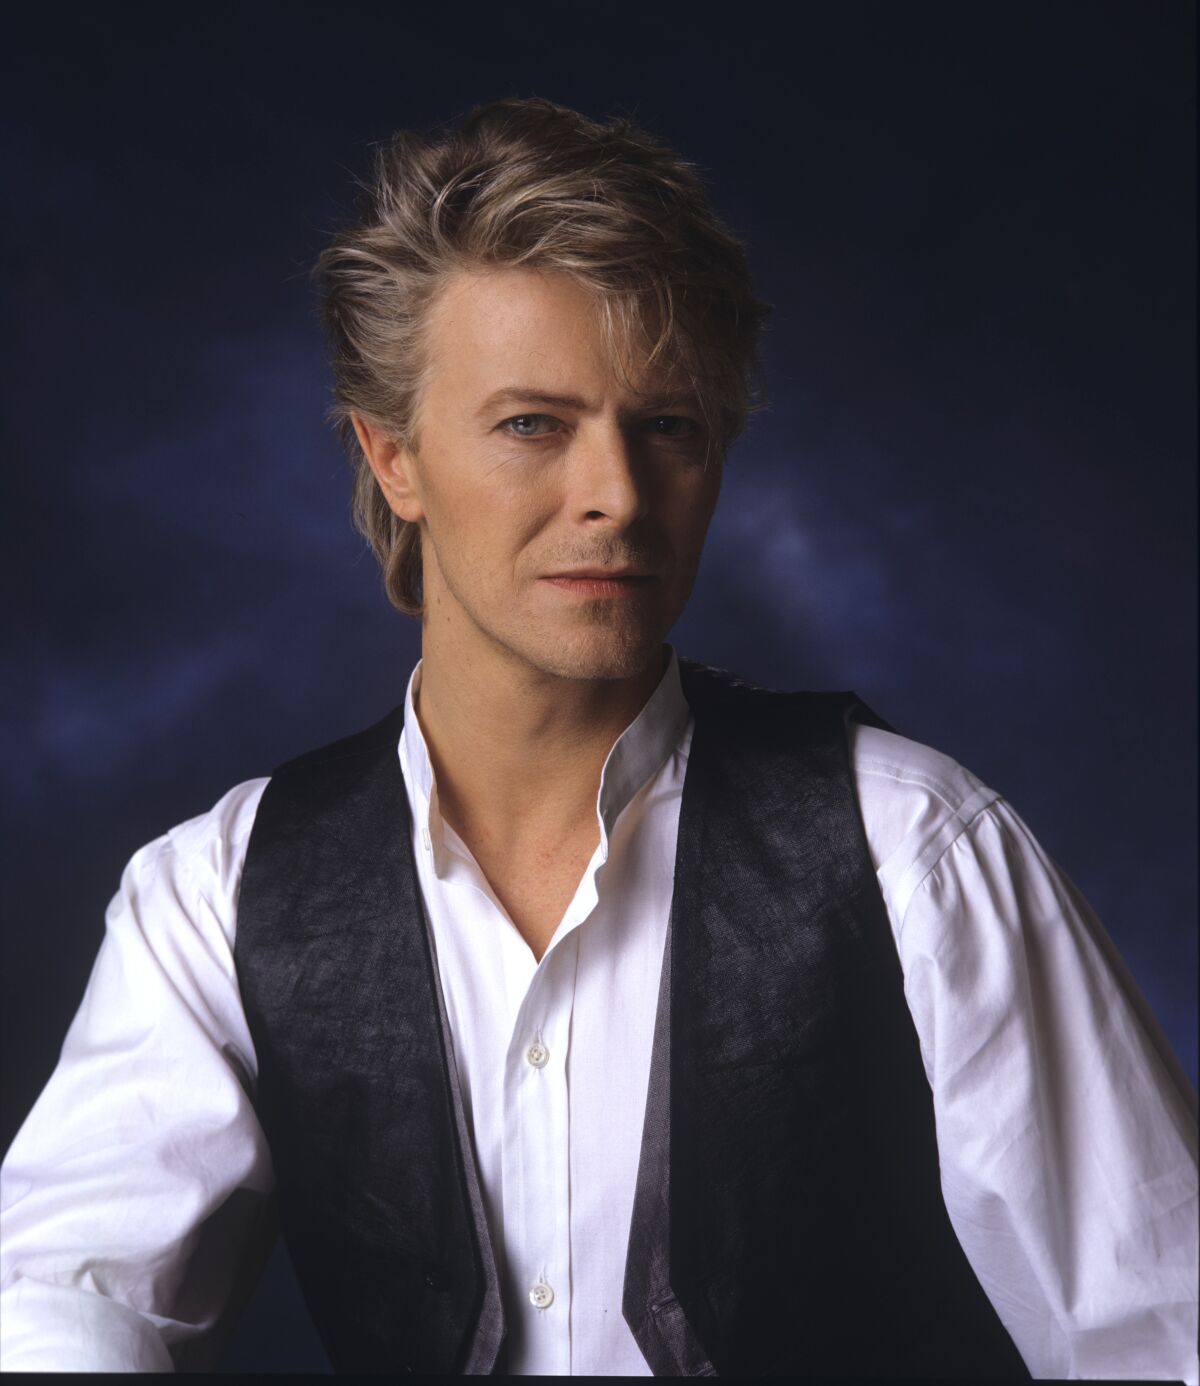 David Bowie in a white button-down shirt and black vest